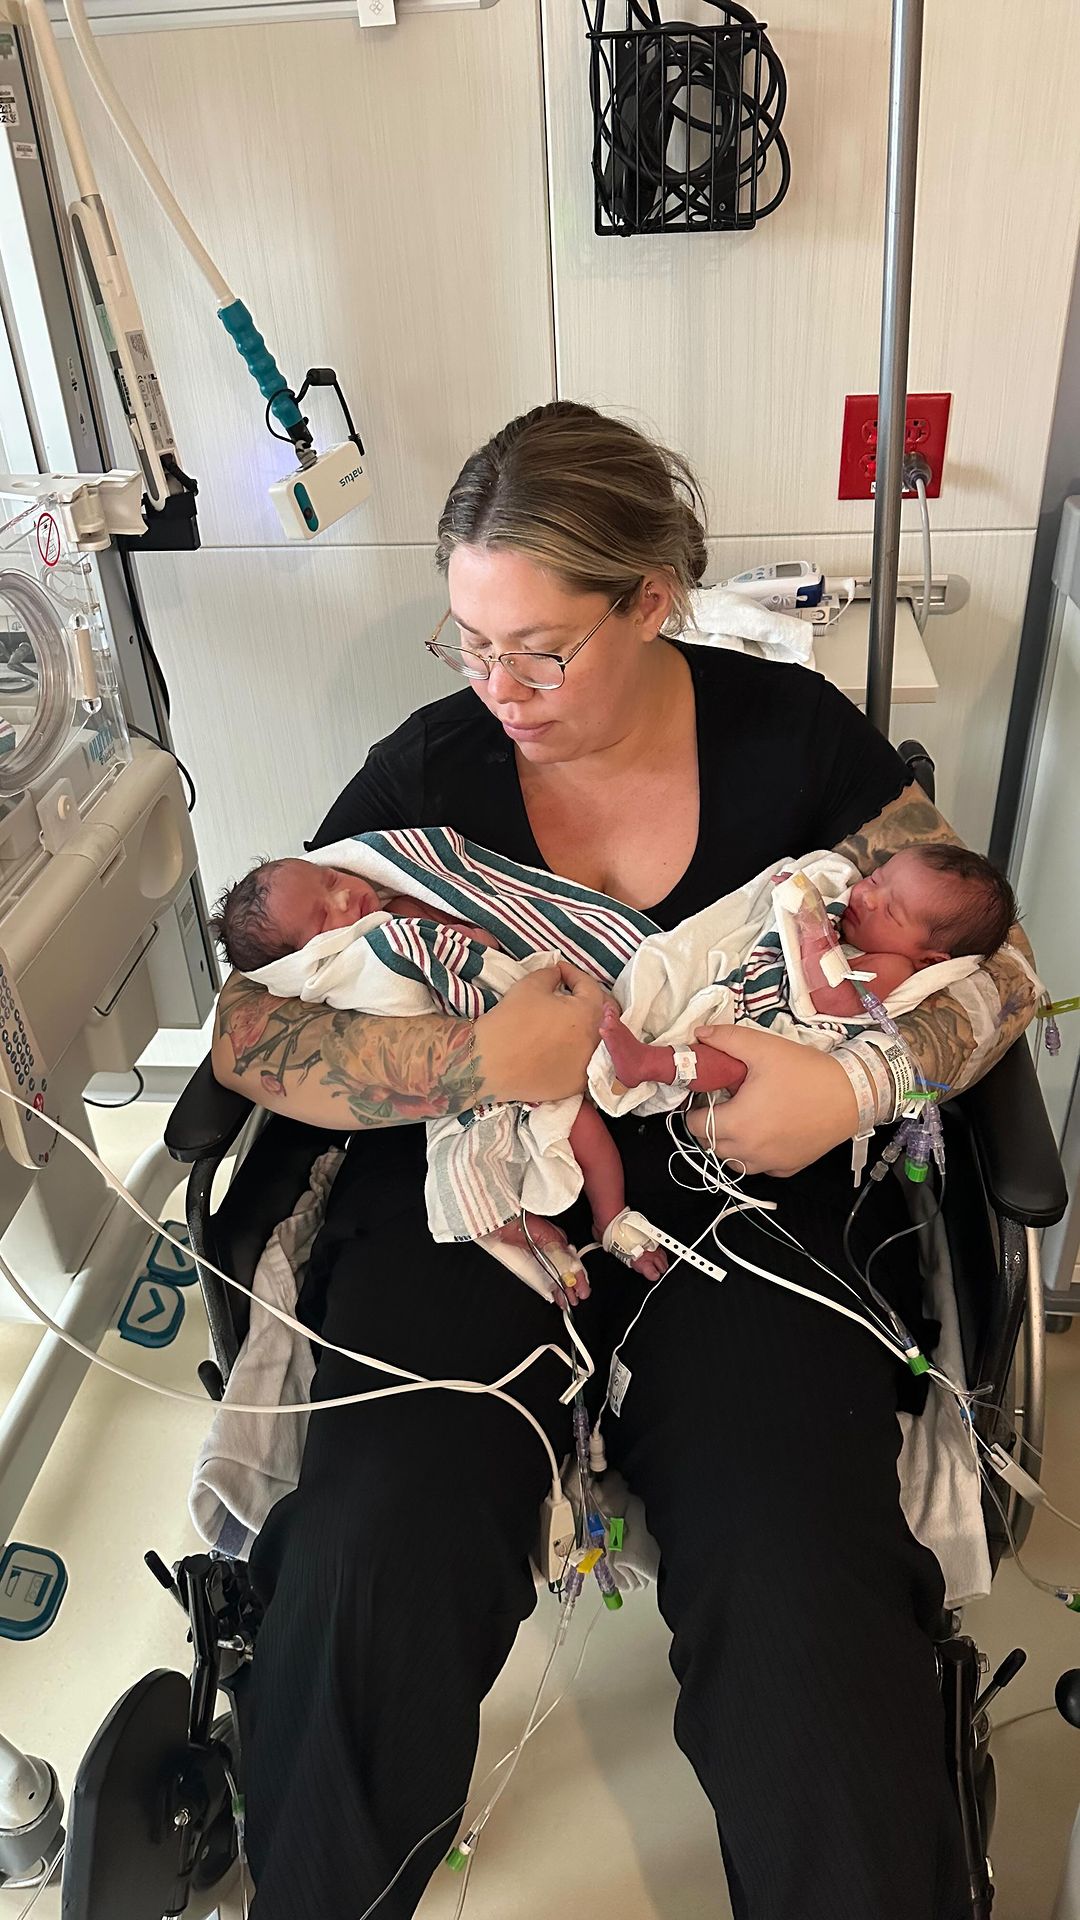 The ex-reality star recently opened up about the twins' terrifying birth story